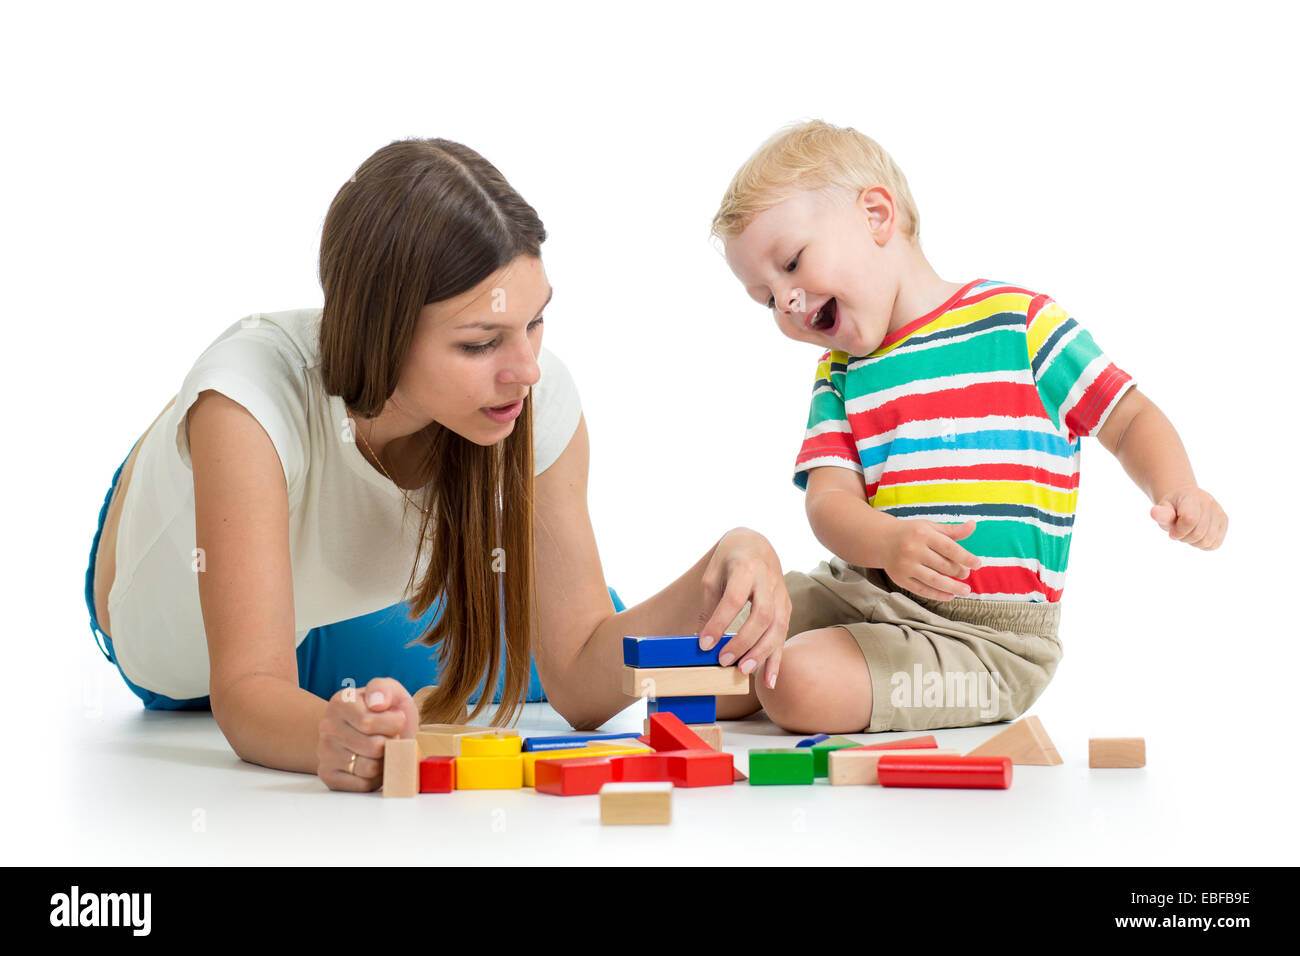 kid and his mom play toys together Stock Photo